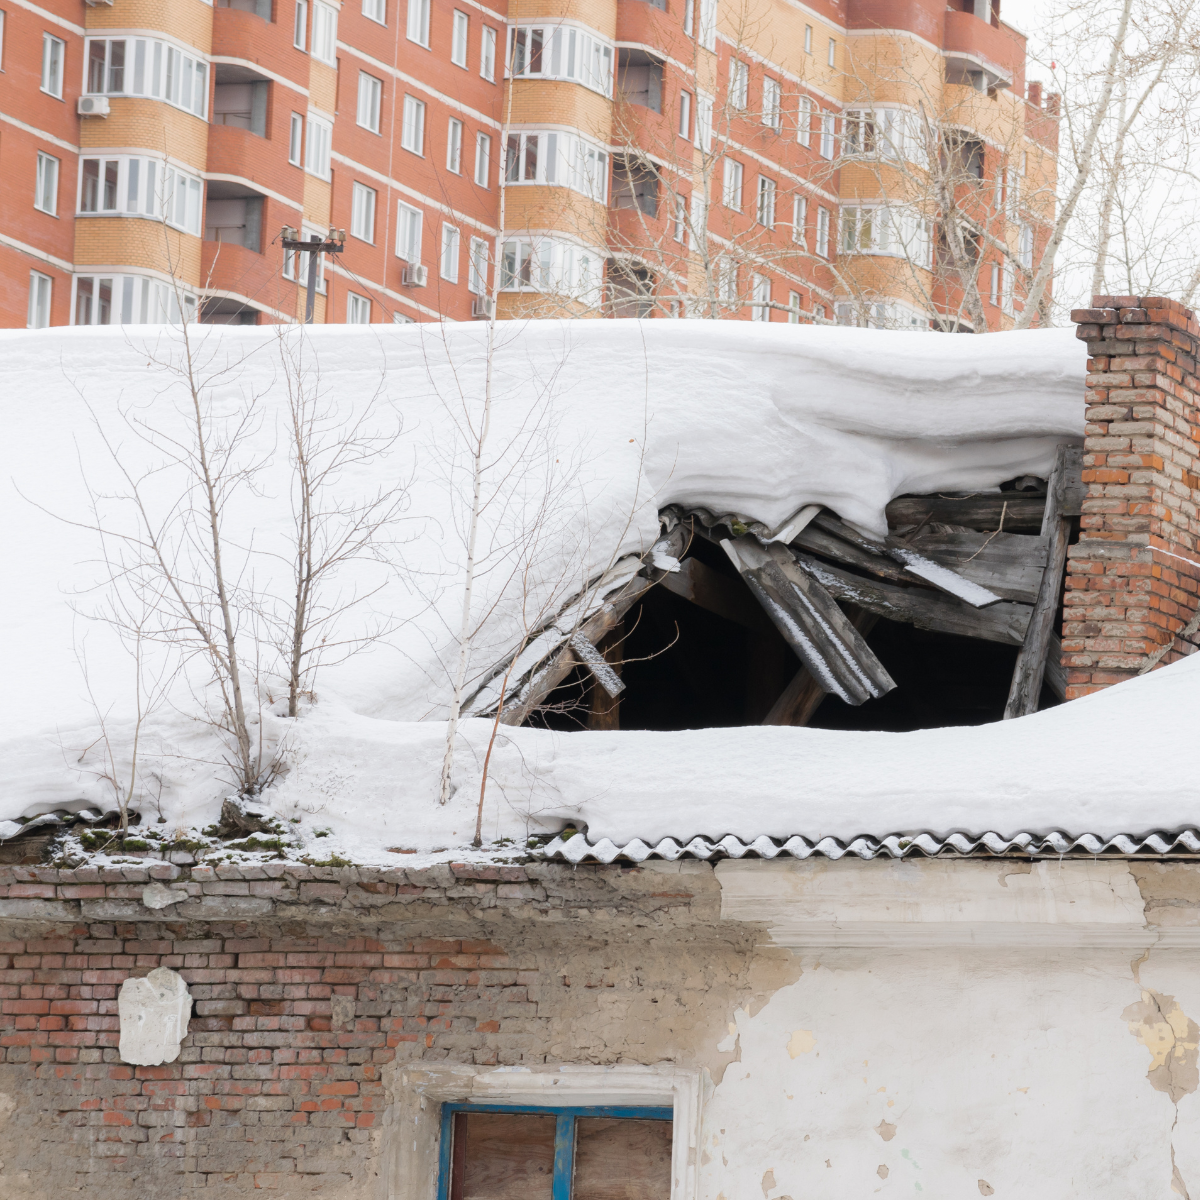 roof collapse from weight of snow